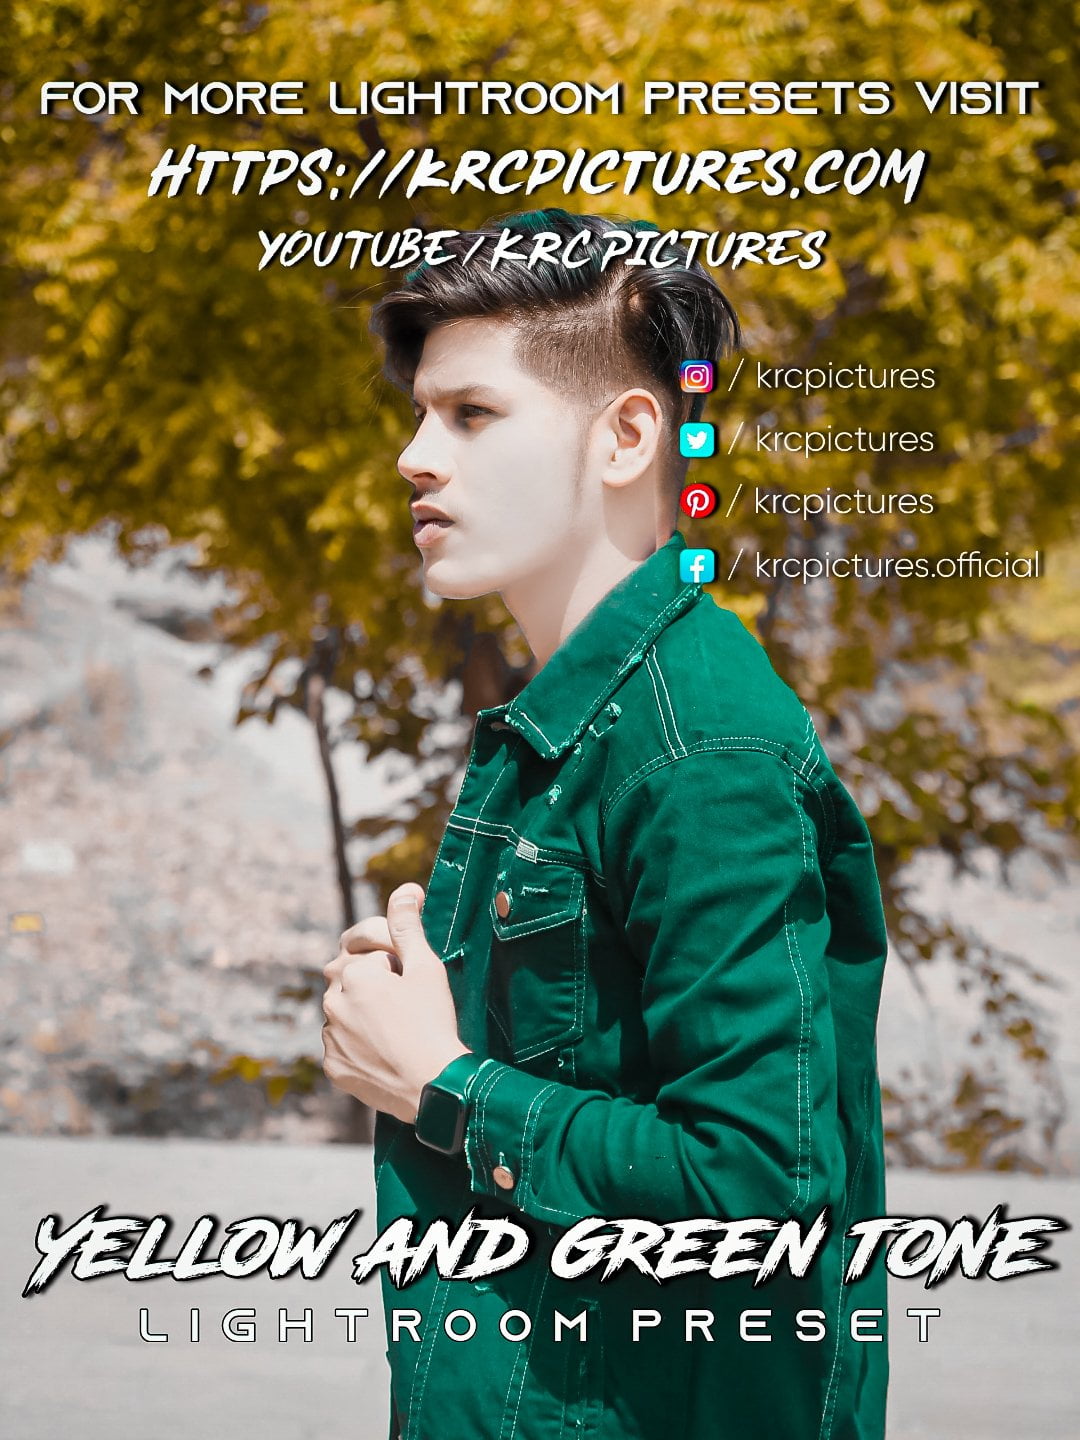 Yellow and green tone preset - KRC PICTURES